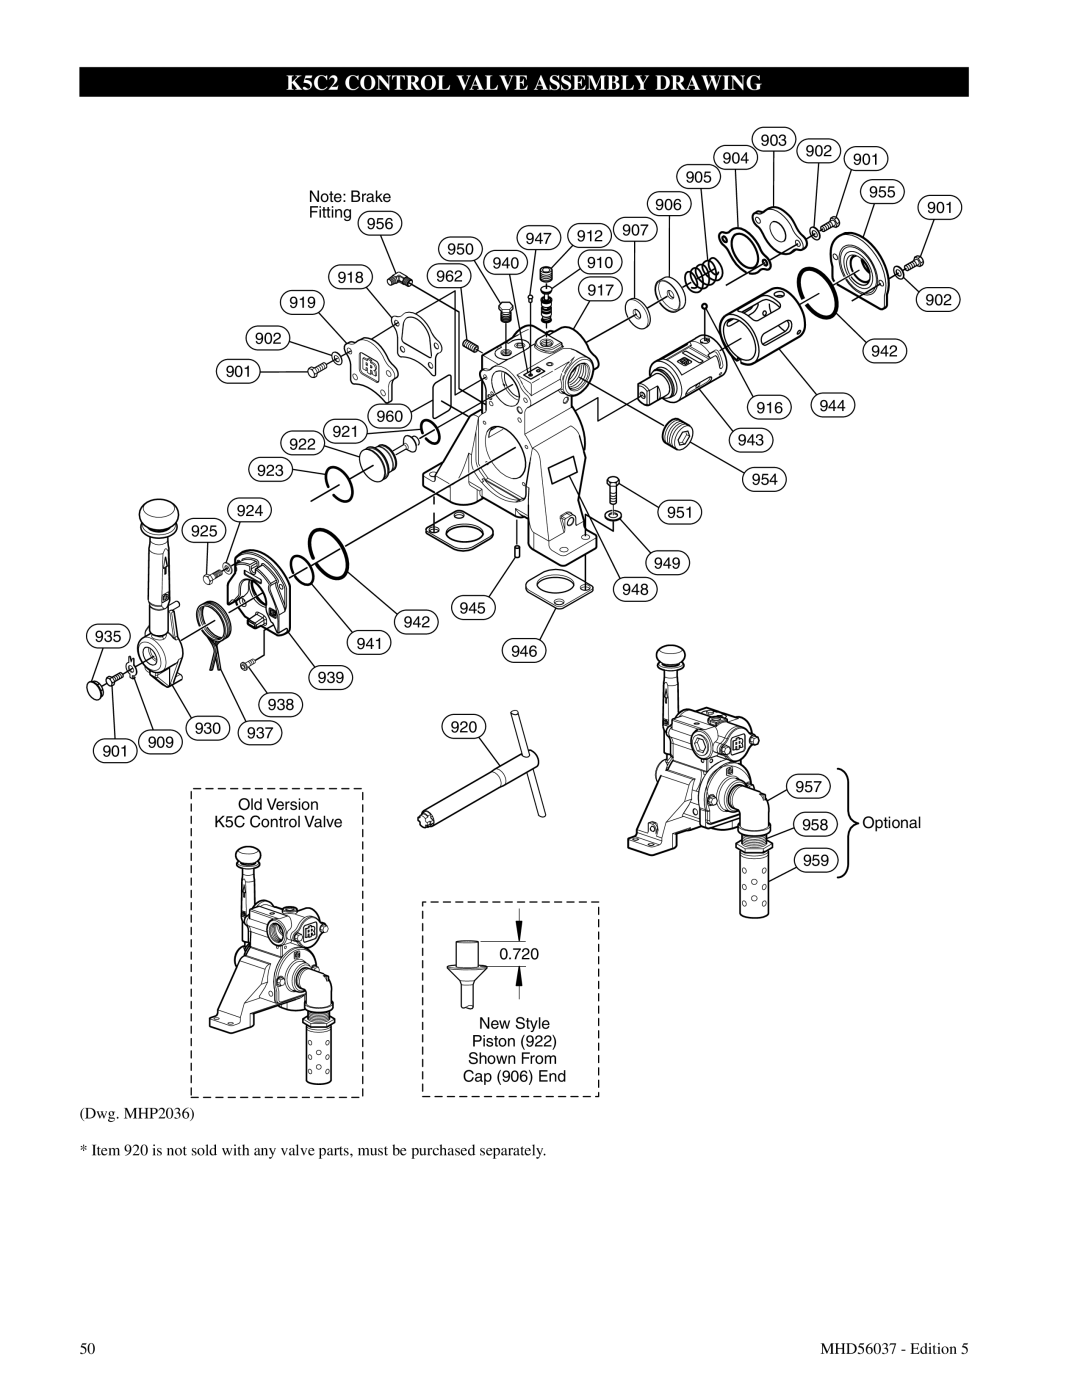 Ingersoll-Rand FA5T manual K5C2 CONTROL VALVE ASSEMBLY DRAWING, Dwg. MHP2036 